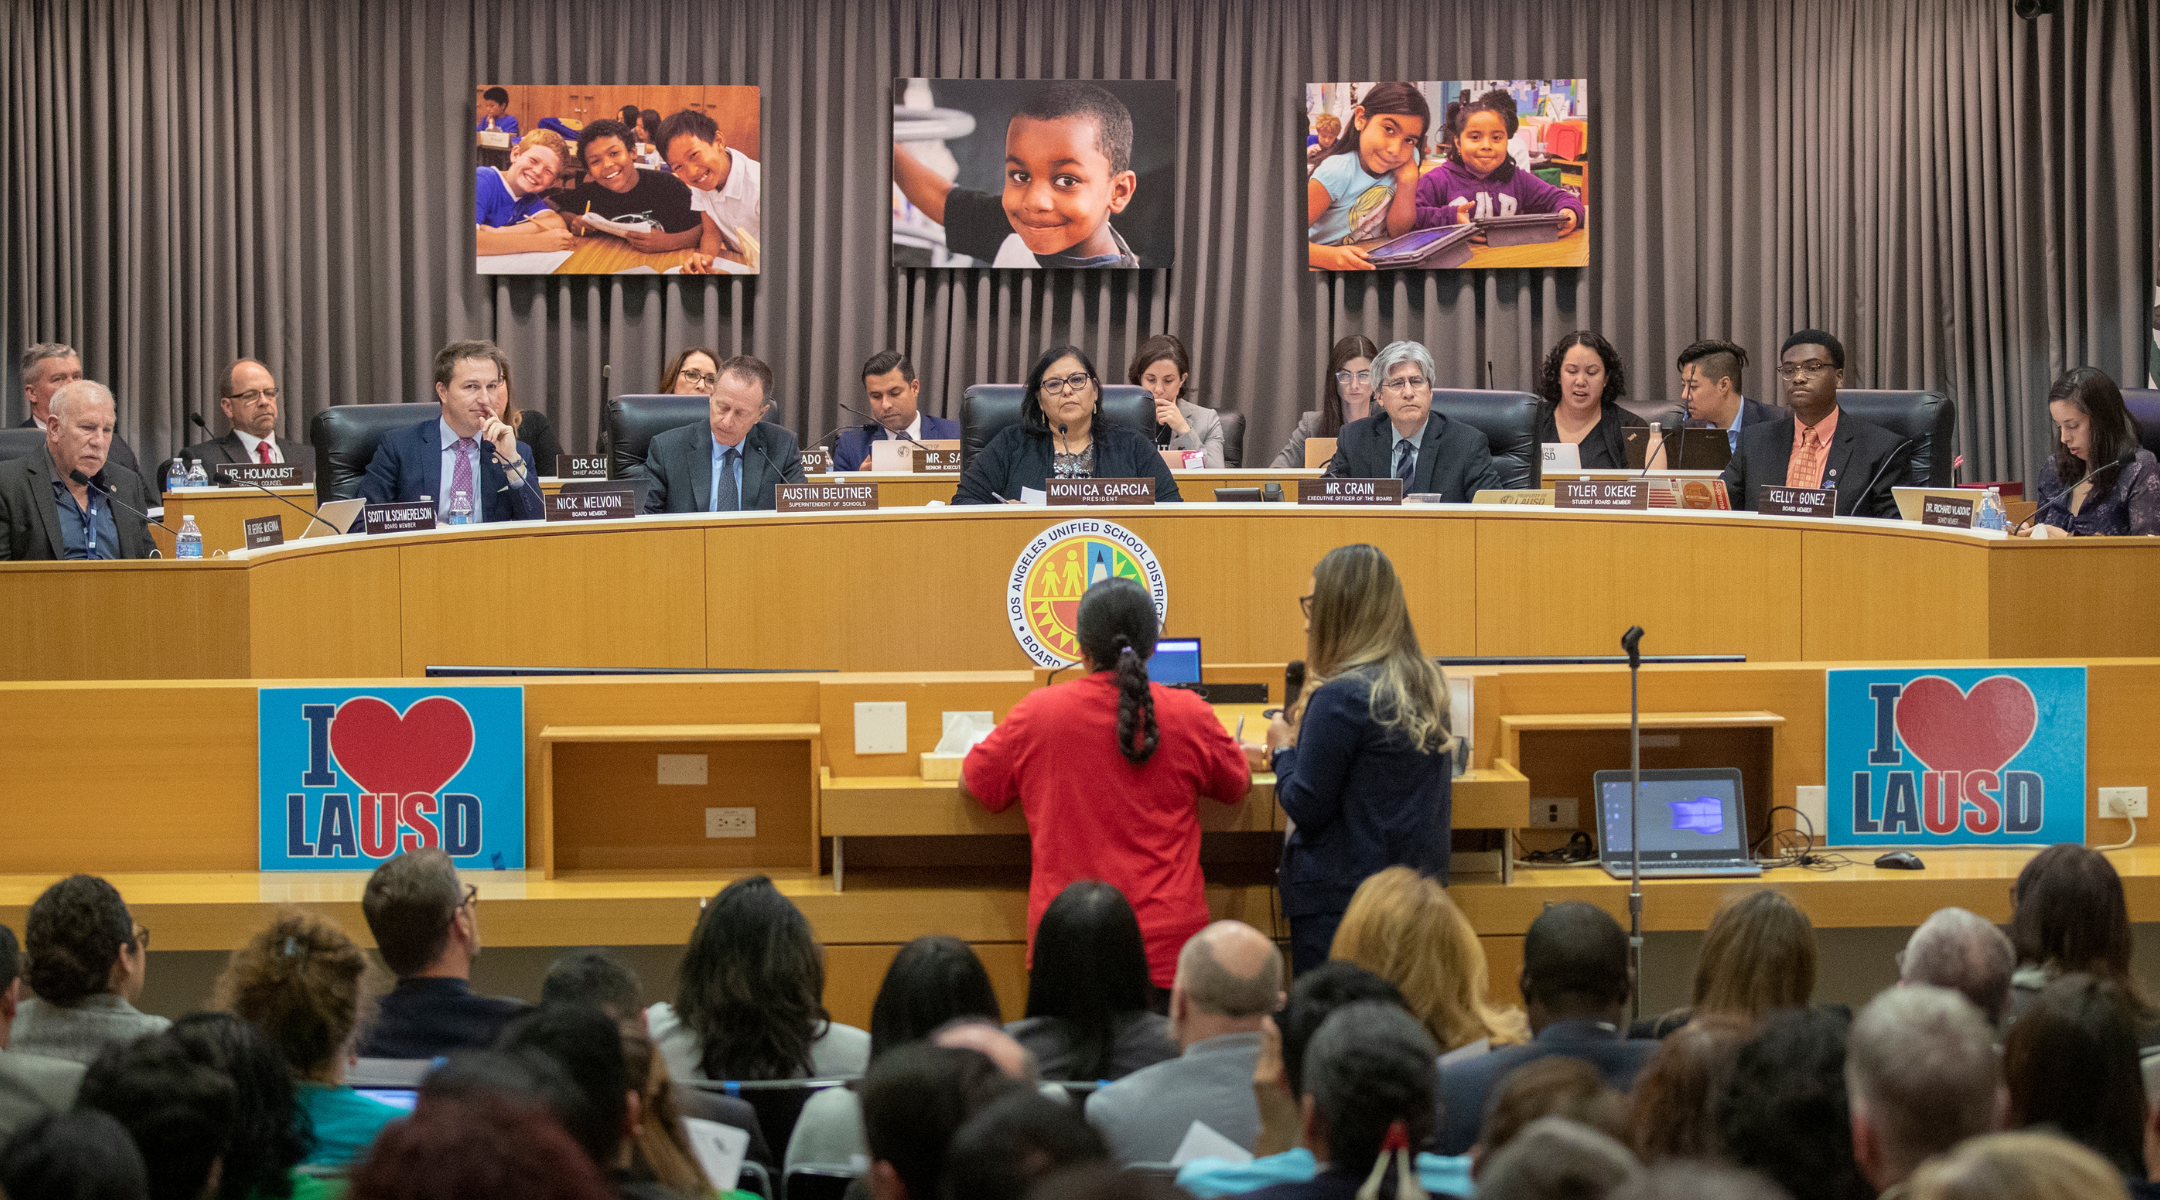 The Los Angeles Unified School District board during a Board of Education meeting, Jan. 29, 2019. (Allen J. Schaben/Los Angeles Times via Getty Images)